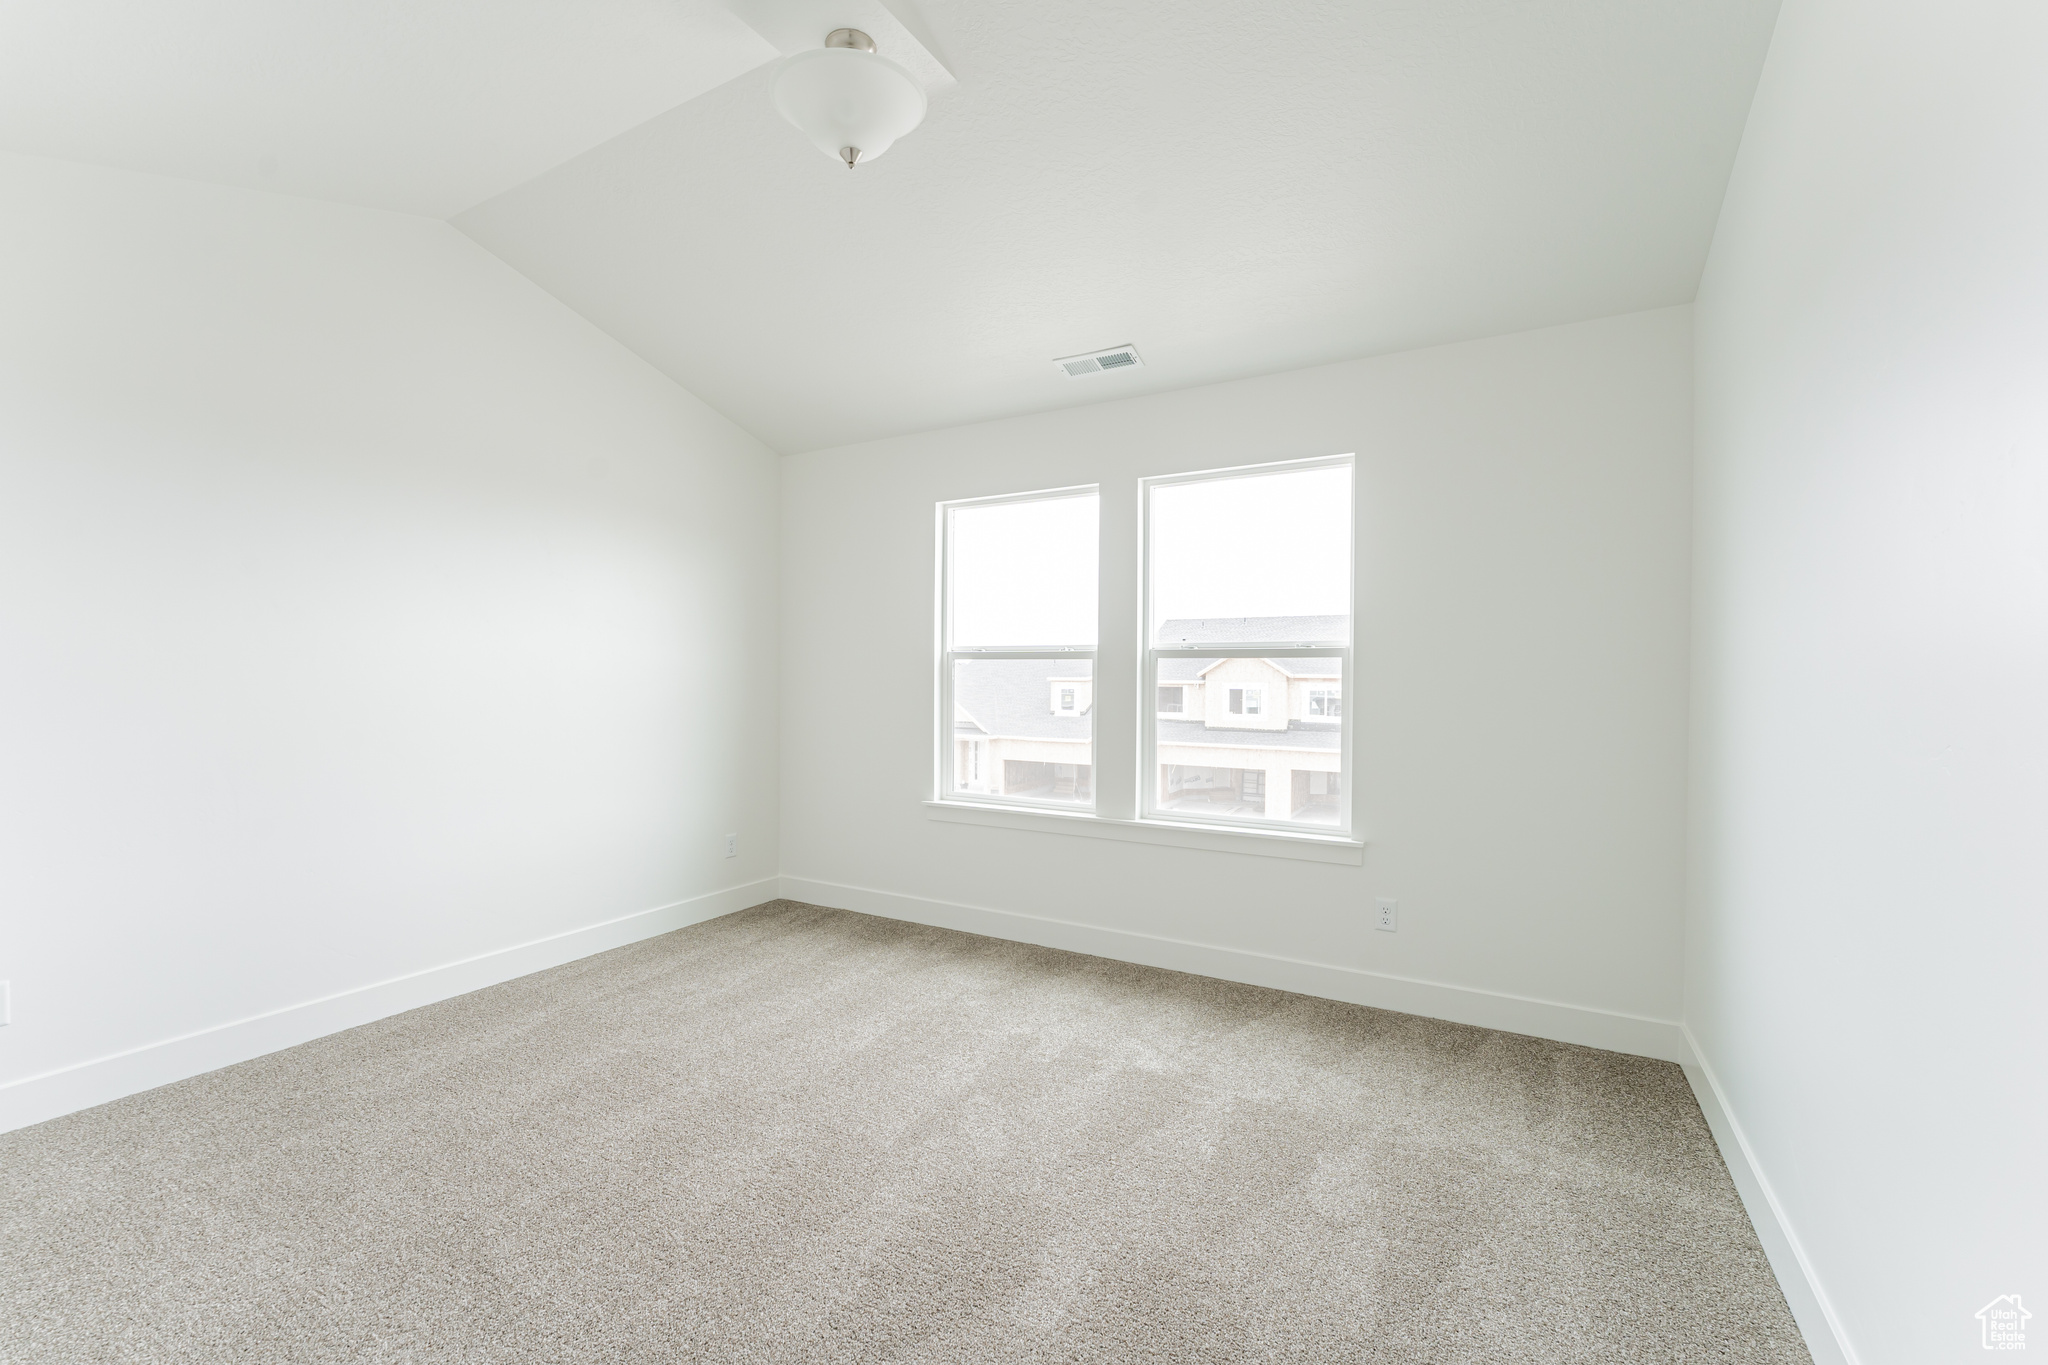 Carpeted empty room with lofted ceiling